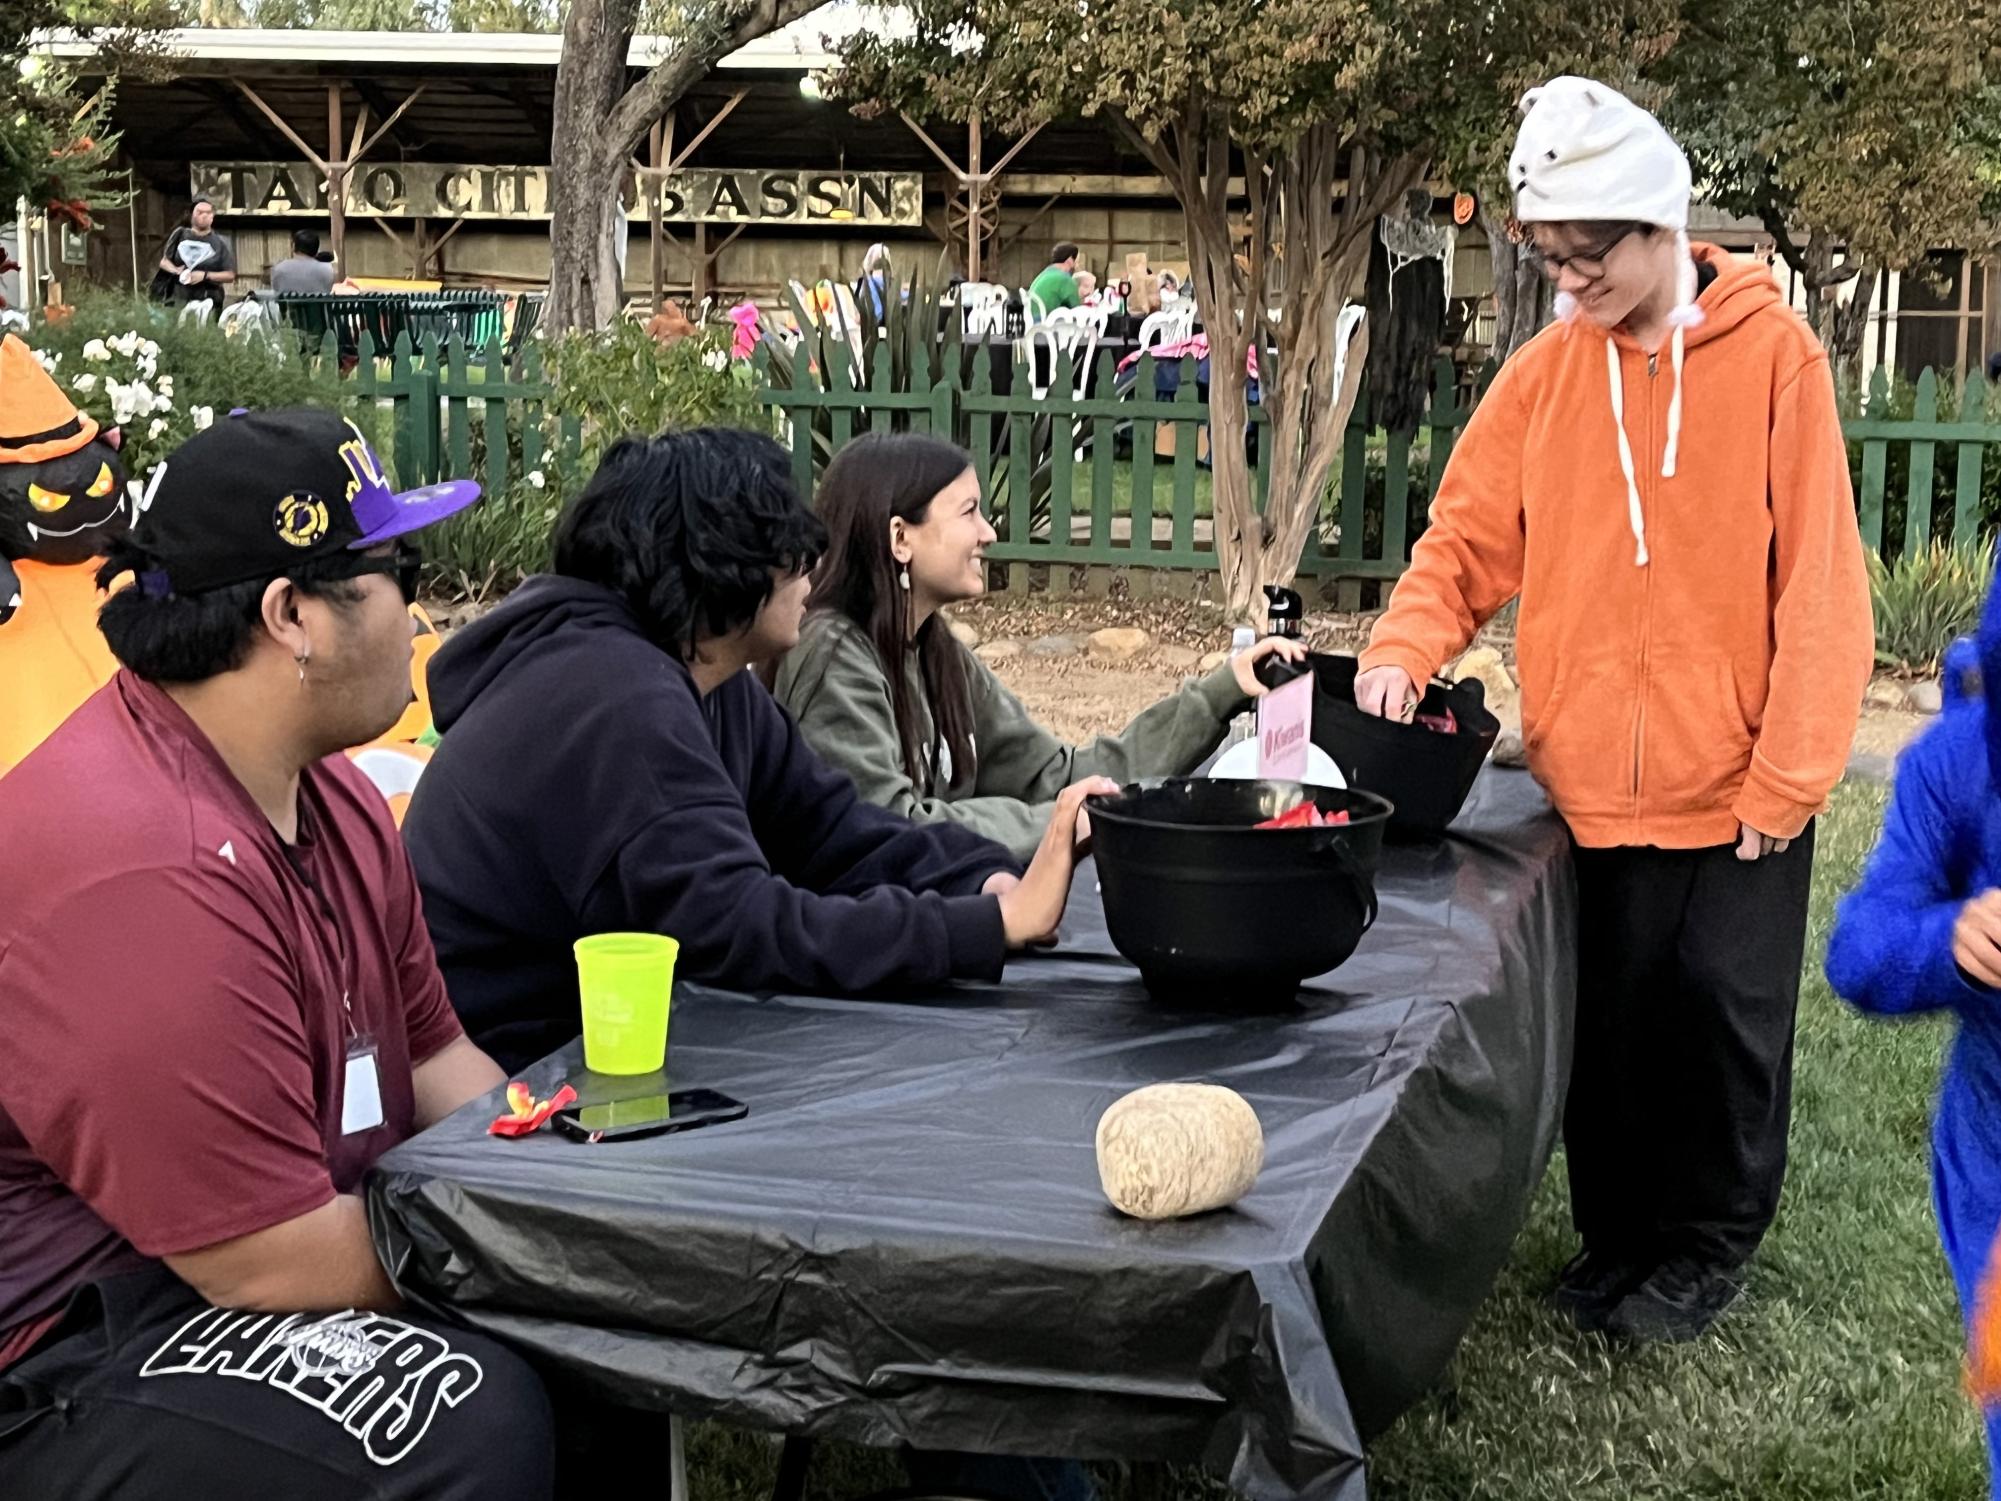 Circle K International club at the Heritage Halloween event at Strathern Historical Park in Simi Valley.